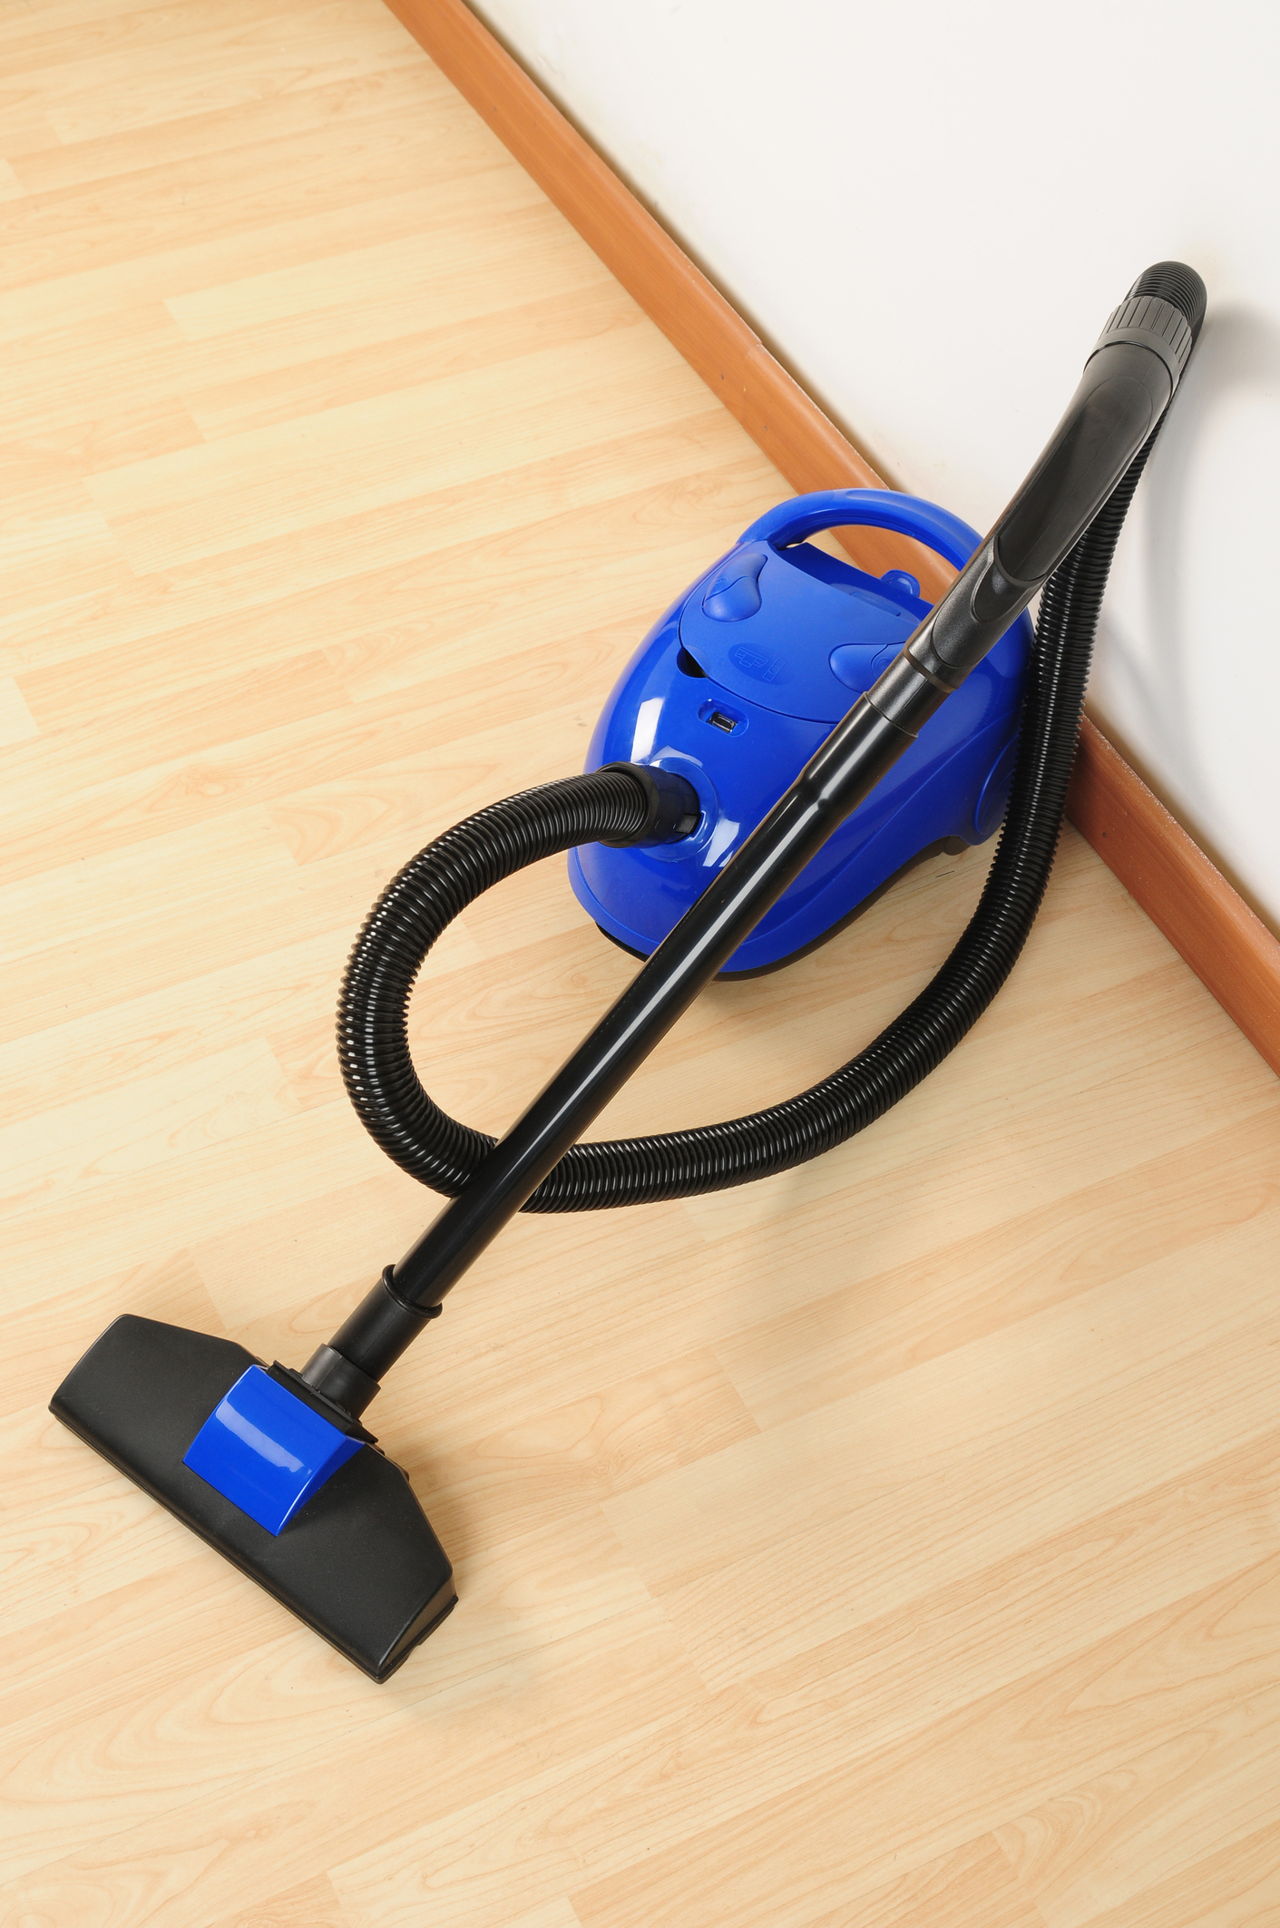 Clean Laminate Floors Without Streaking, How To Clean Laminate Floors Without Leaving Streaks